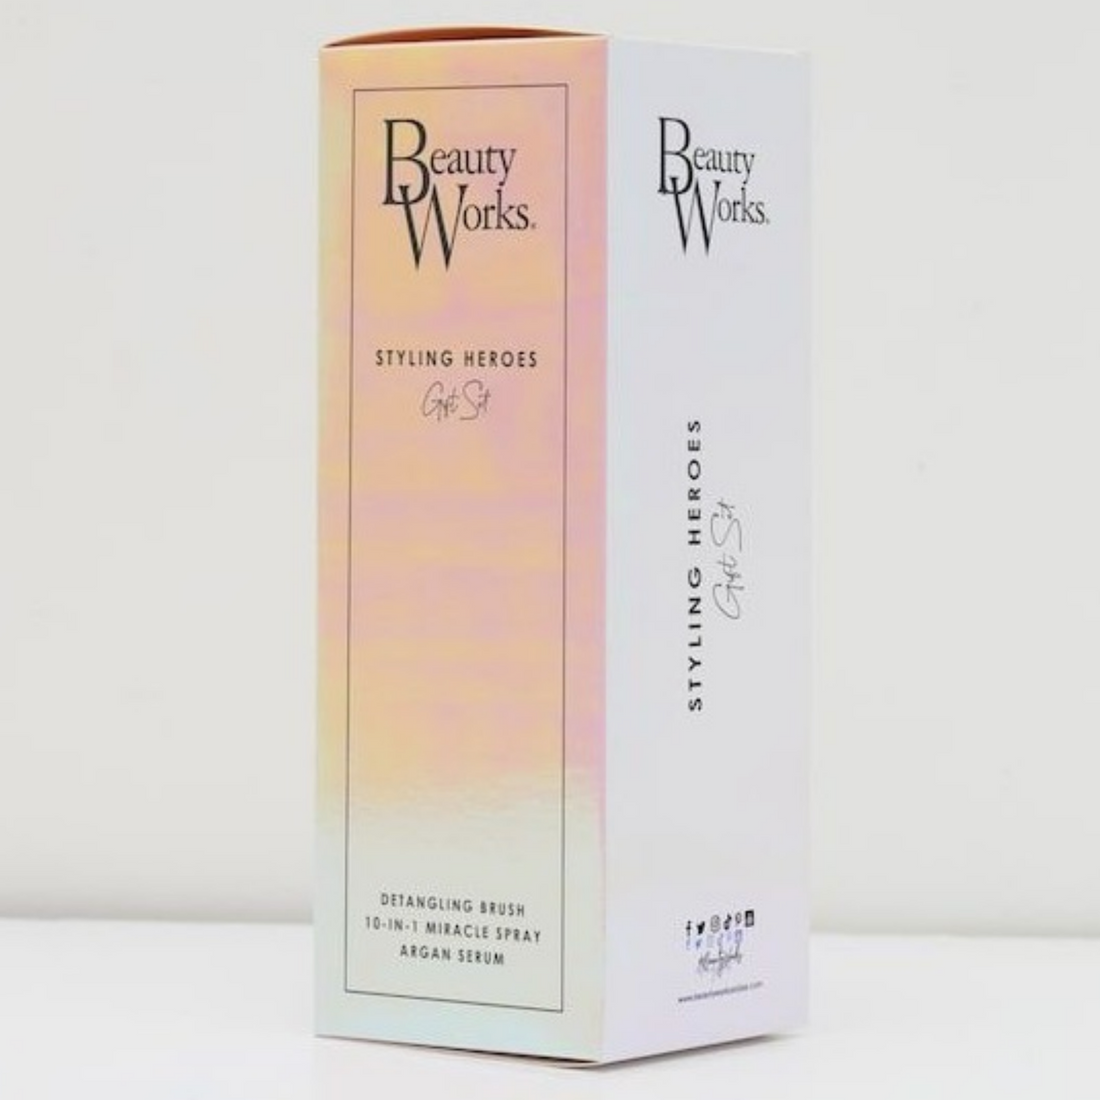 Beauty Works Styling Heroes Gift Set, packaging